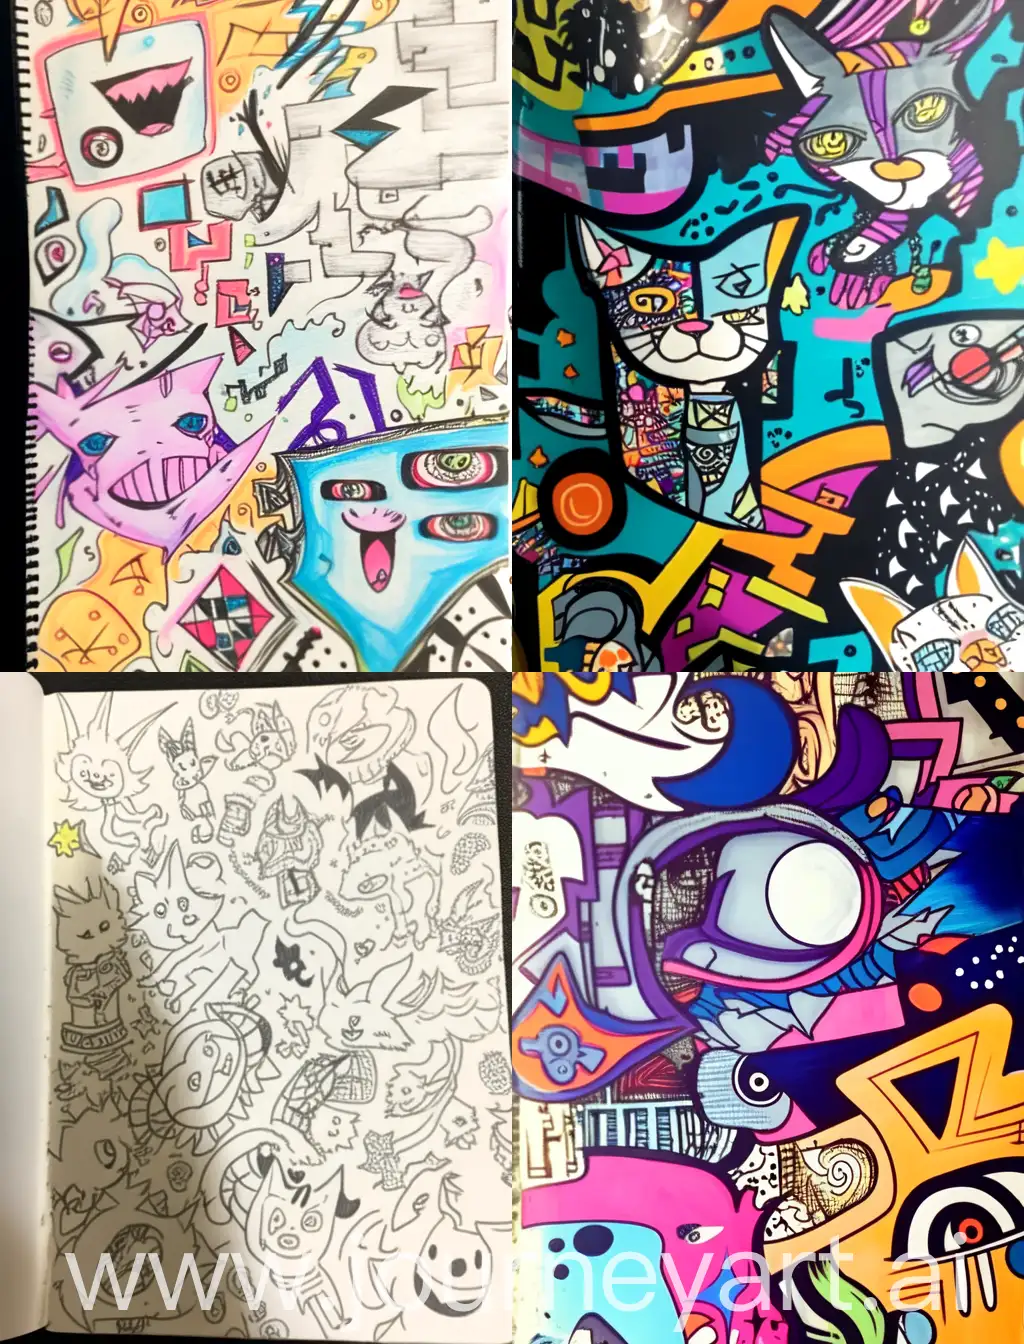 graffiti
doodle in the style of Keith Haring
bold lines and solid colors
mixed patterns
text and emoji installations
in the style of Grunge Beauty

Stray cats and dogs on campus
